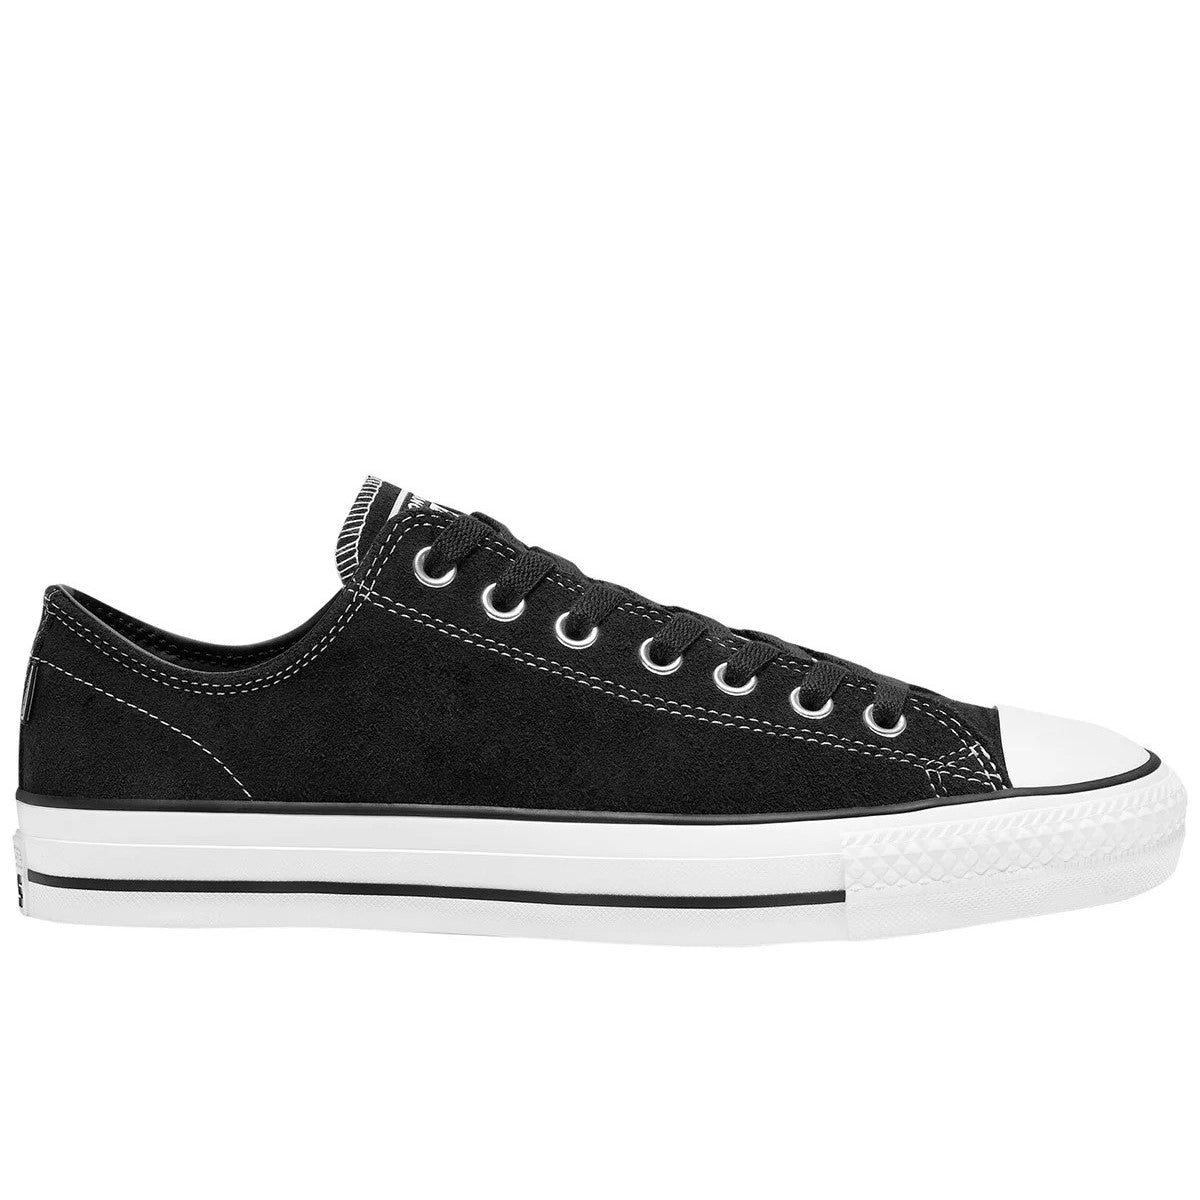 Converse Unisex Cons Chuck Taylor All Star Pro Suede Sneaker